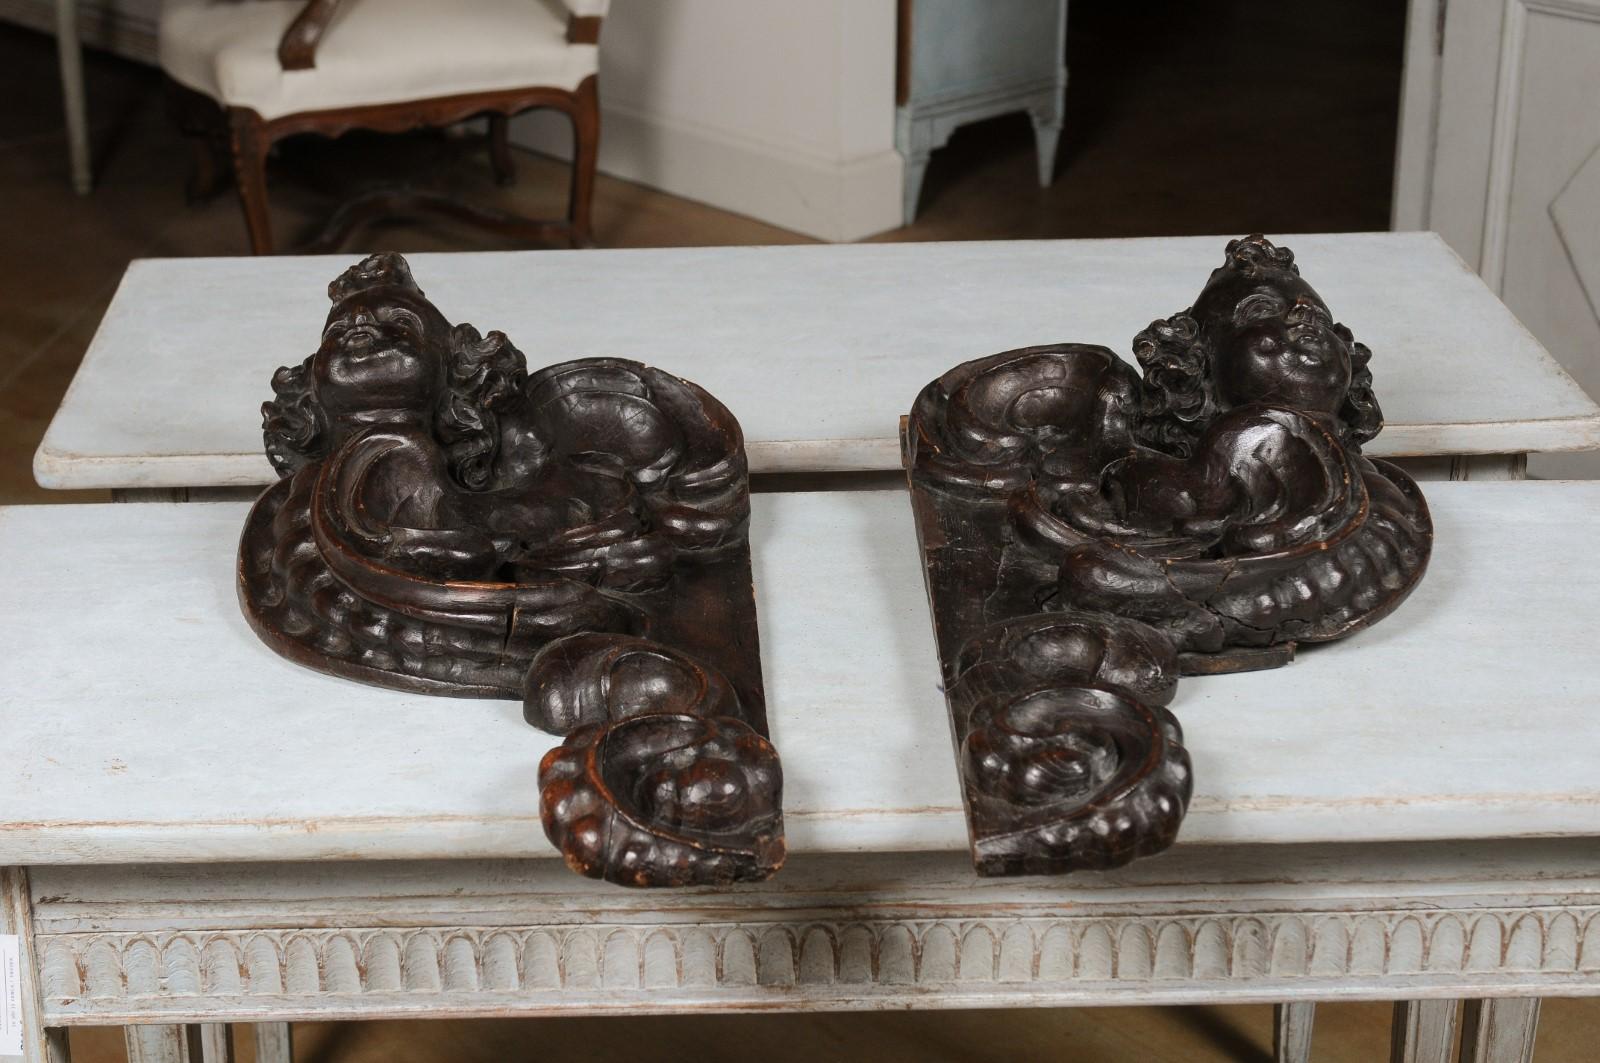 A pair of French Louis XIV period late 17th century carved cherub appliques from Strasbourg, with scrolling design. Born in the Alsacien city of Strasbourg in 1690s (which was annexed by French King Louis XIV in 1681), each of this pair of appliques